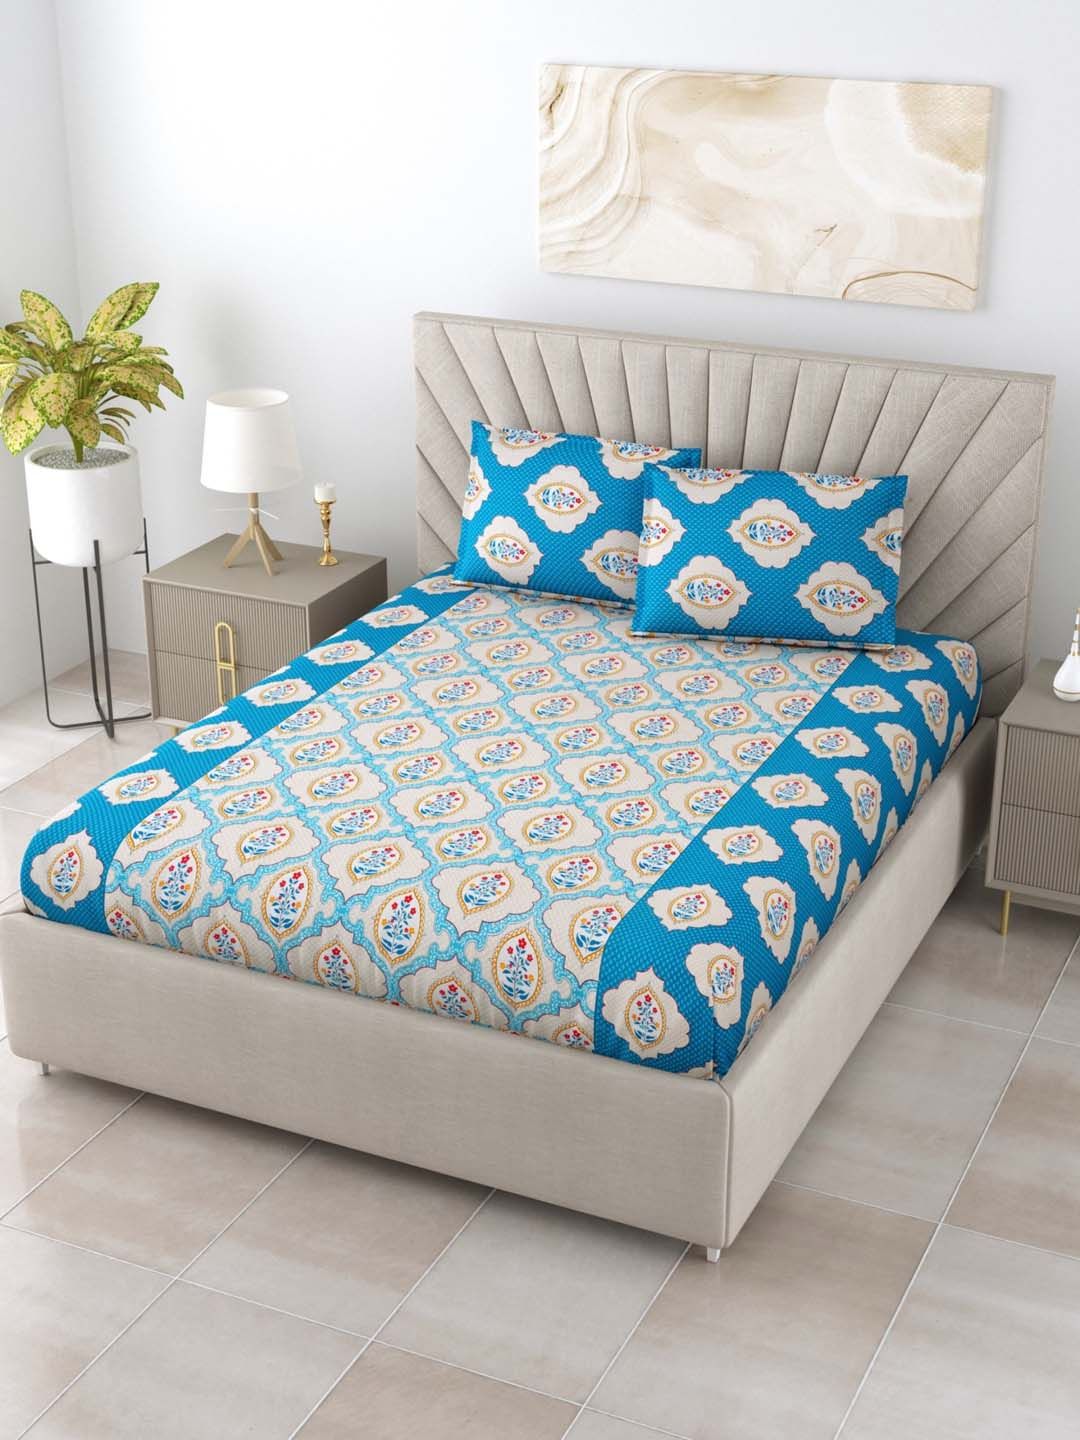 Salona Bichona Ethnic Motifs 144 TC Cotton King Bedsheet with 2 Pillow Covers Price in India